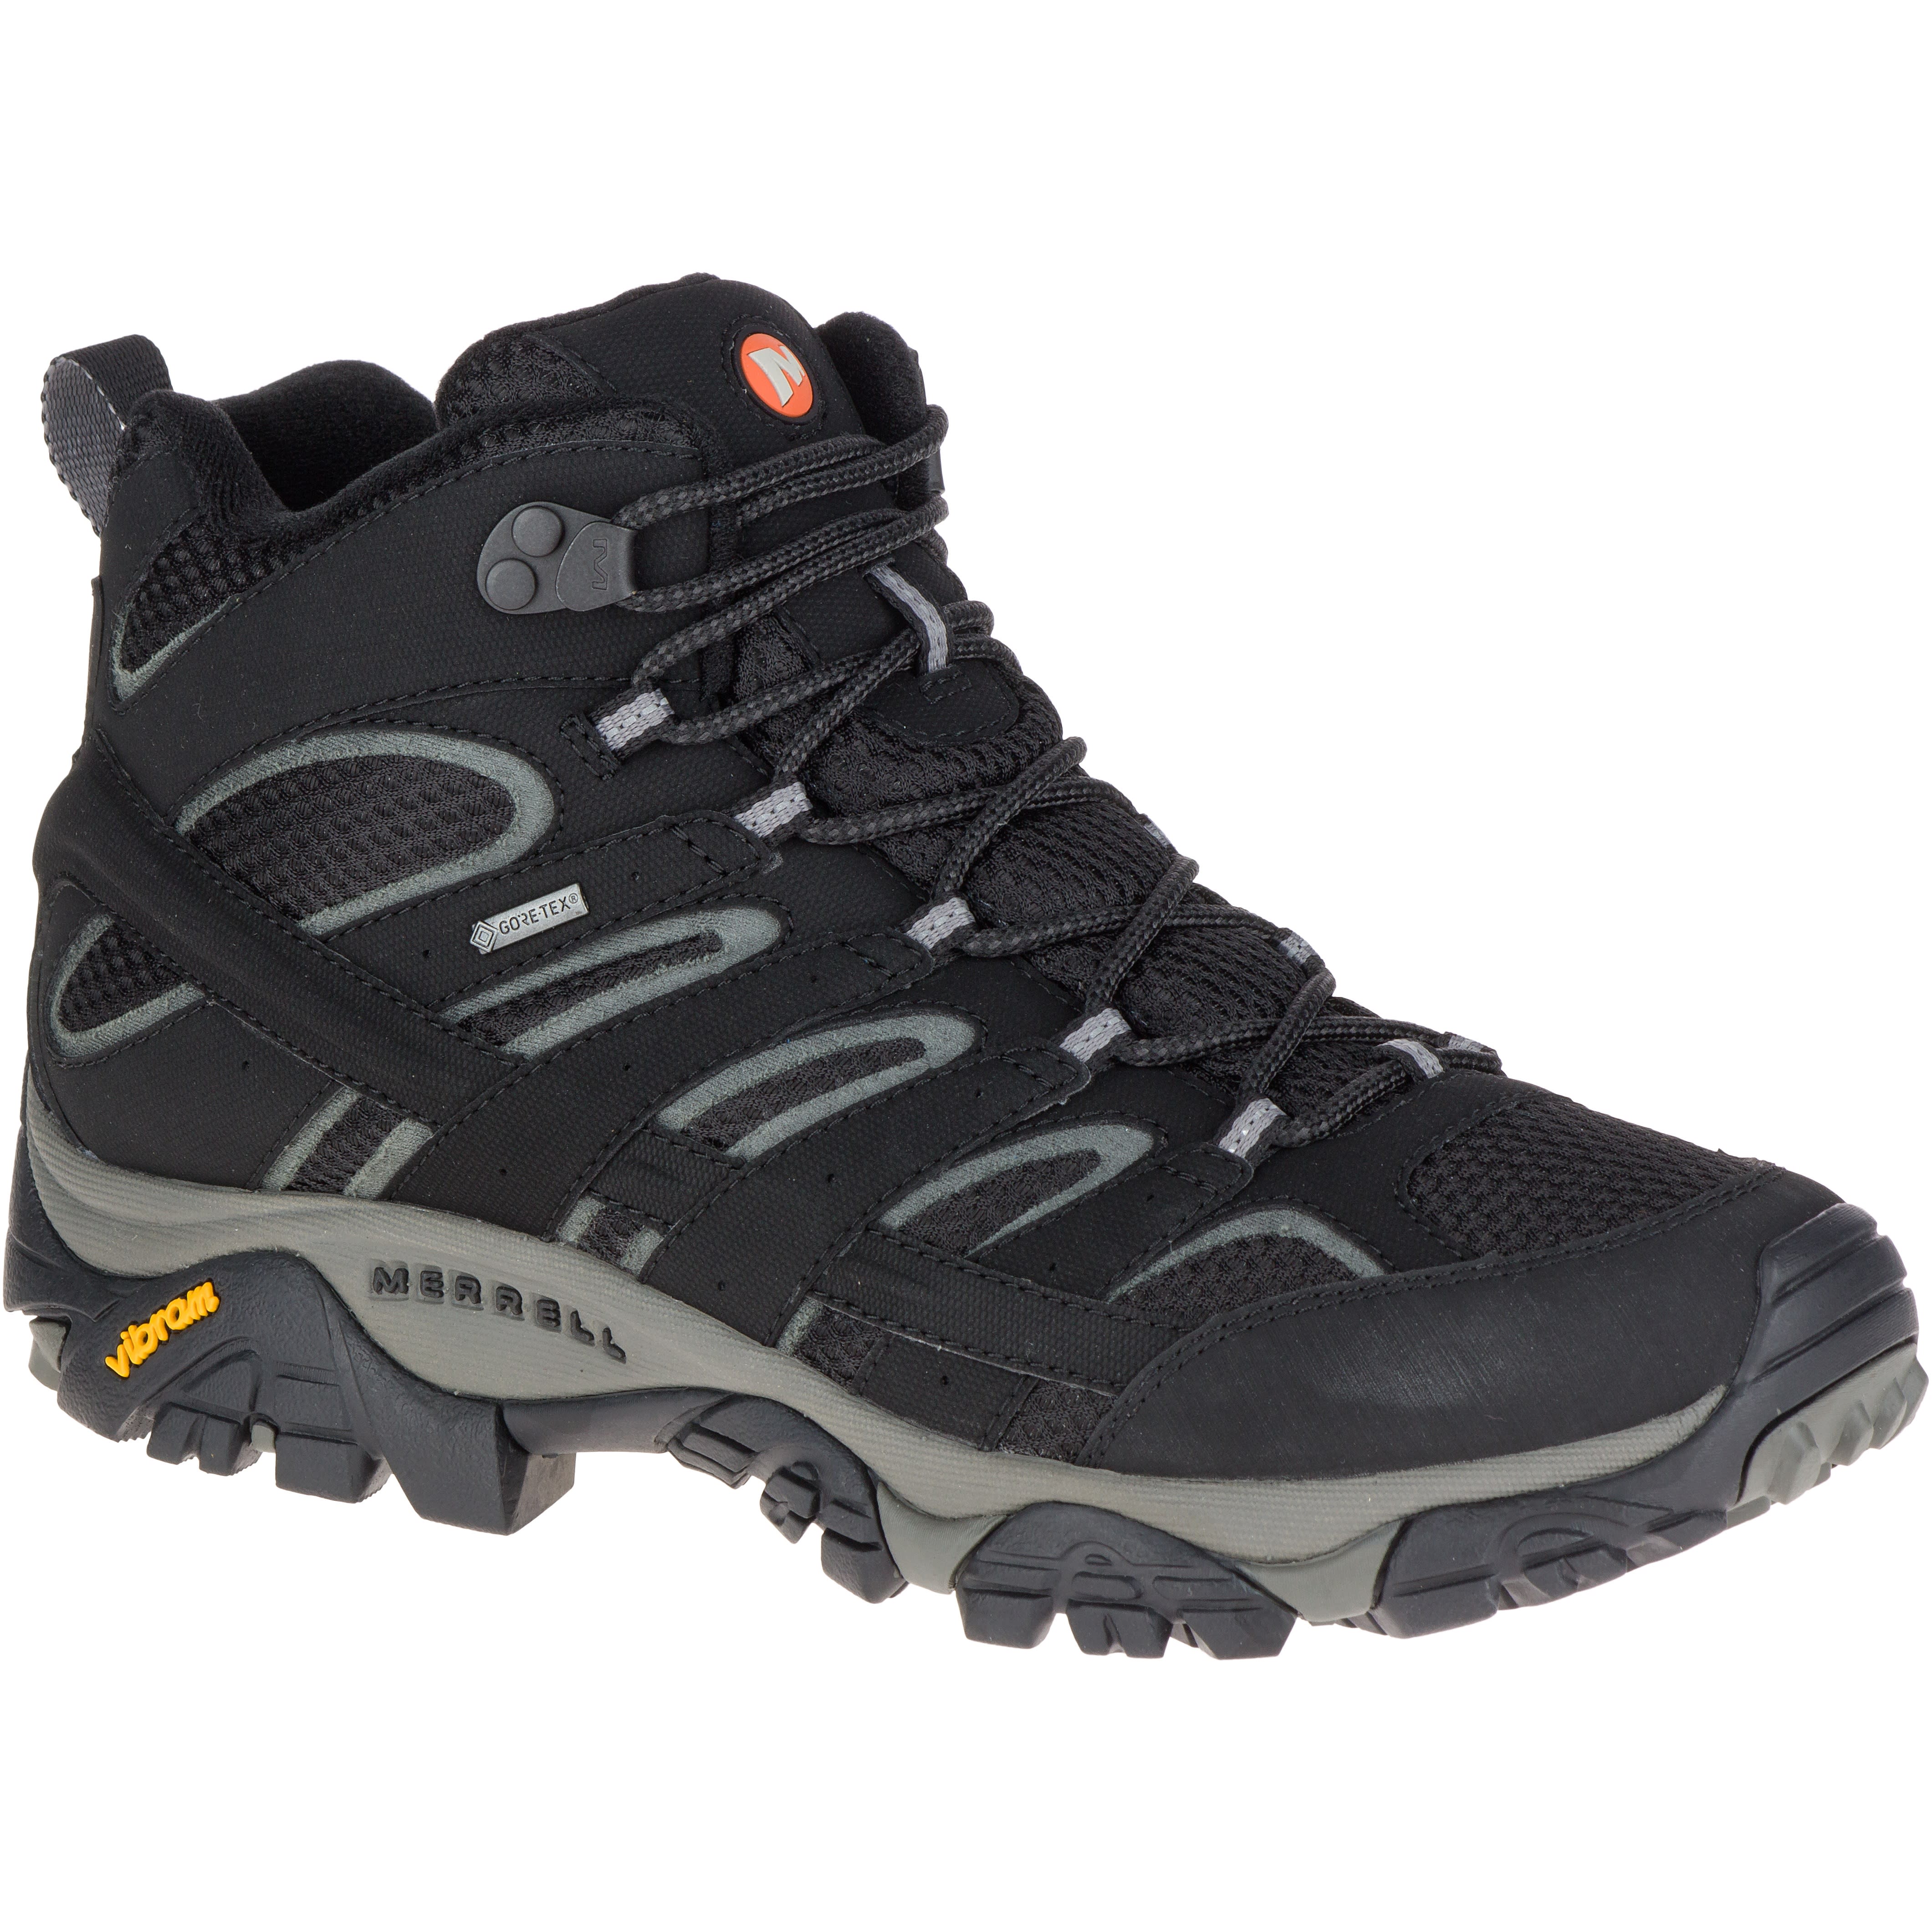 Buy Merrell Men's Moab 2 Mid Gore-Tex from Outnorth